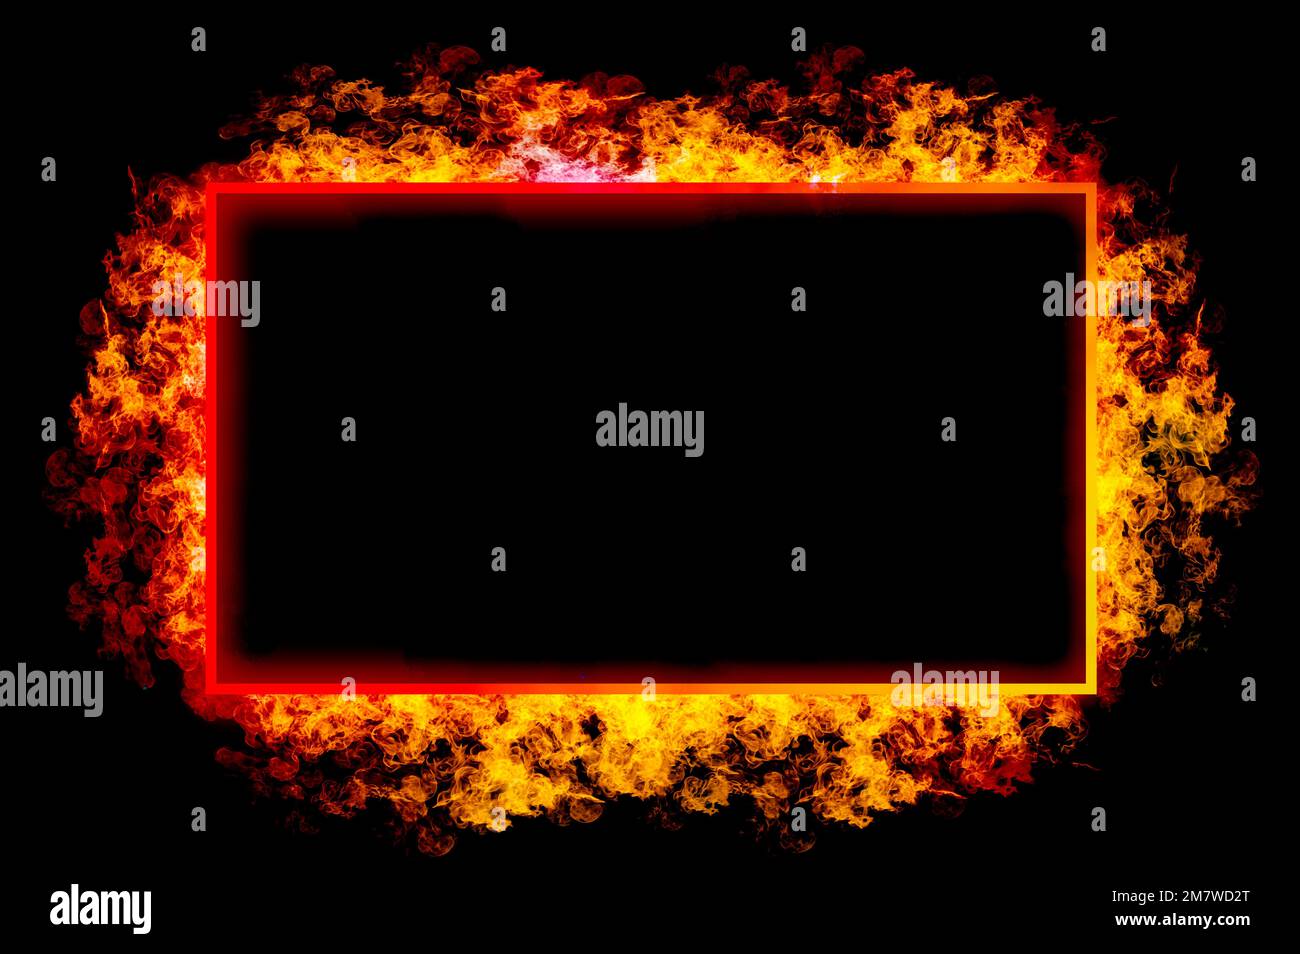 Square frame with orange flames in frame on black background. Stock Photo